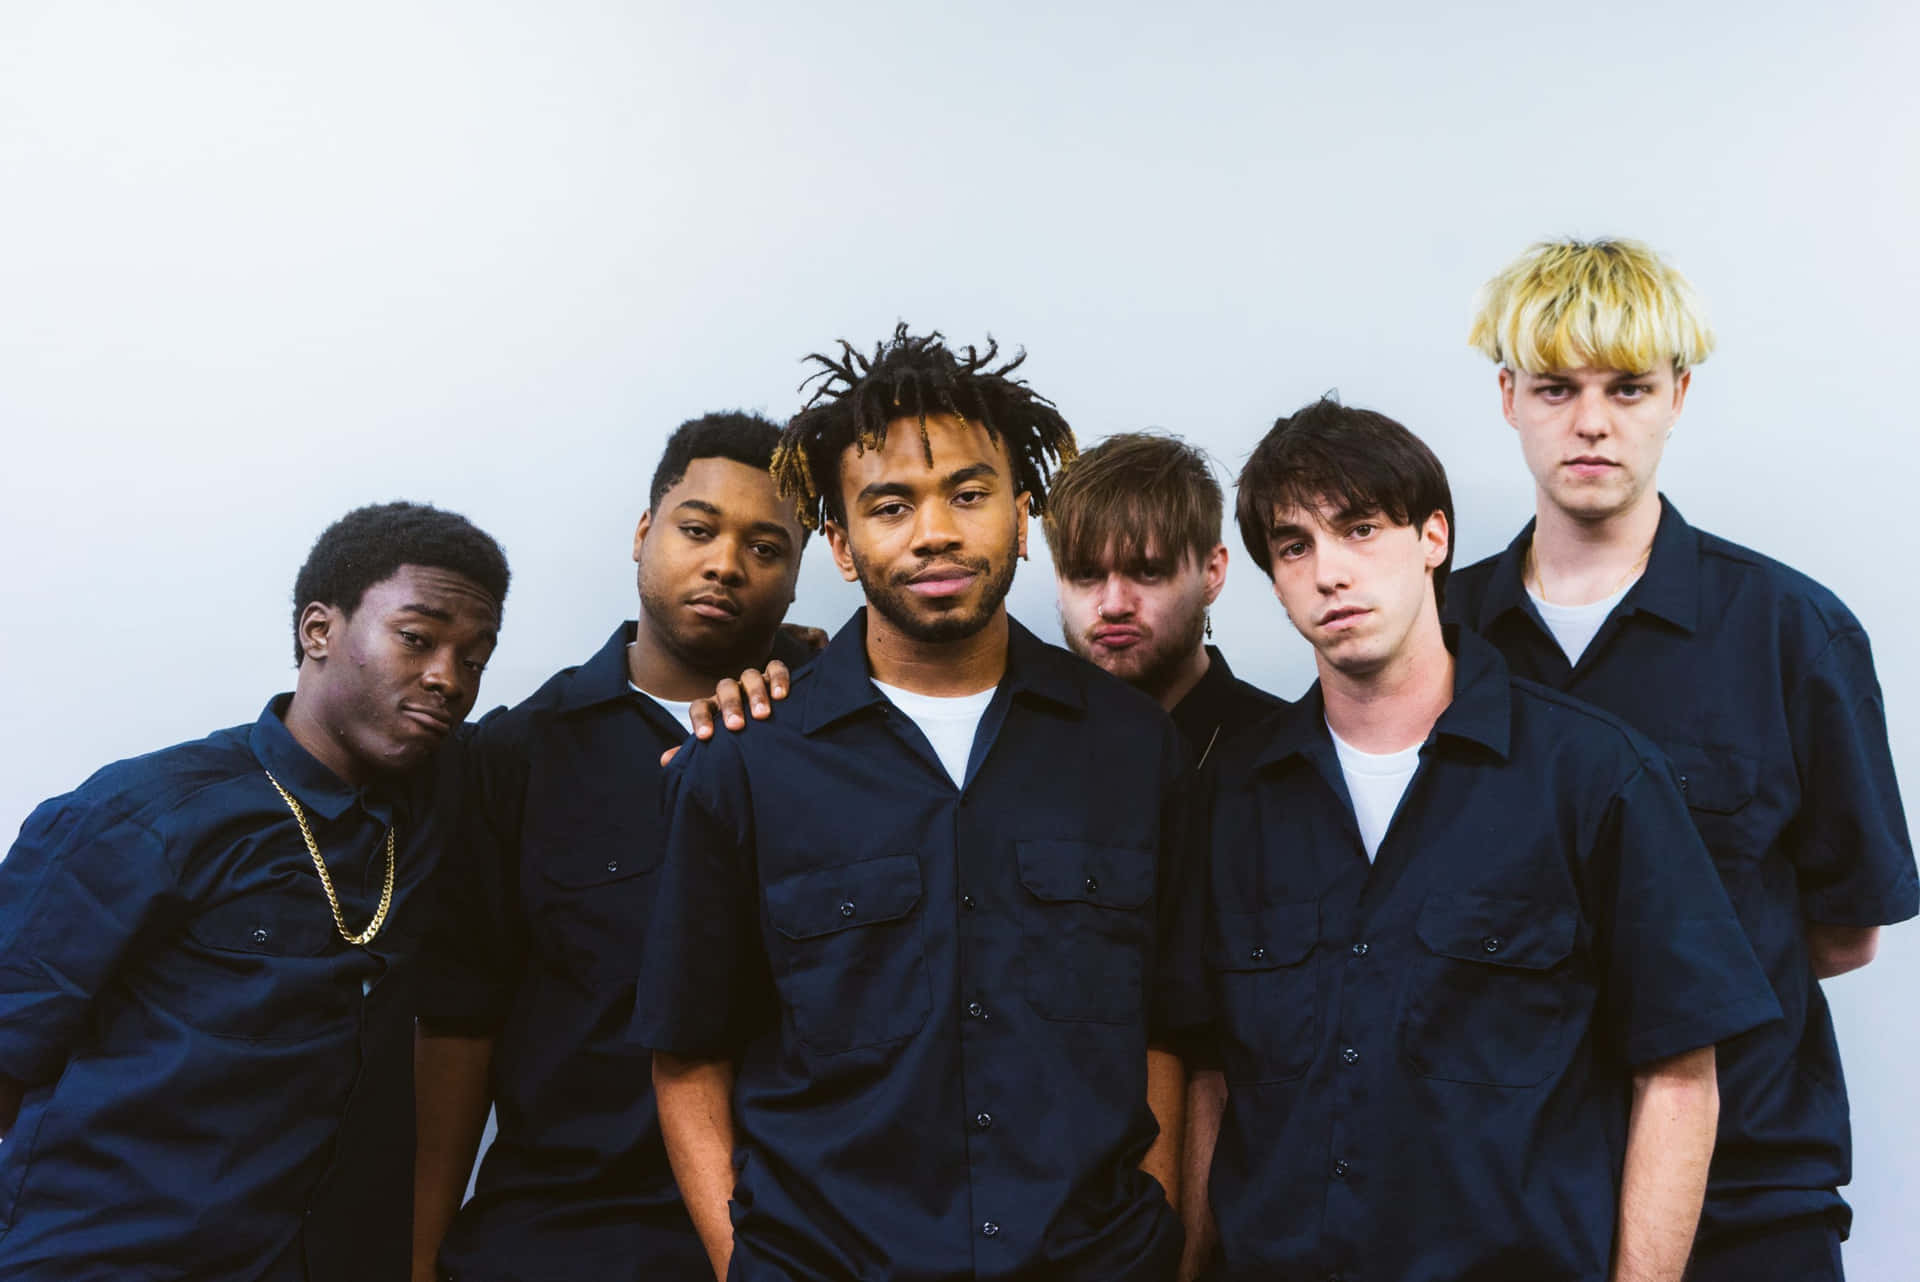 Brockhampton band members posing together in a group photo Wallpaper